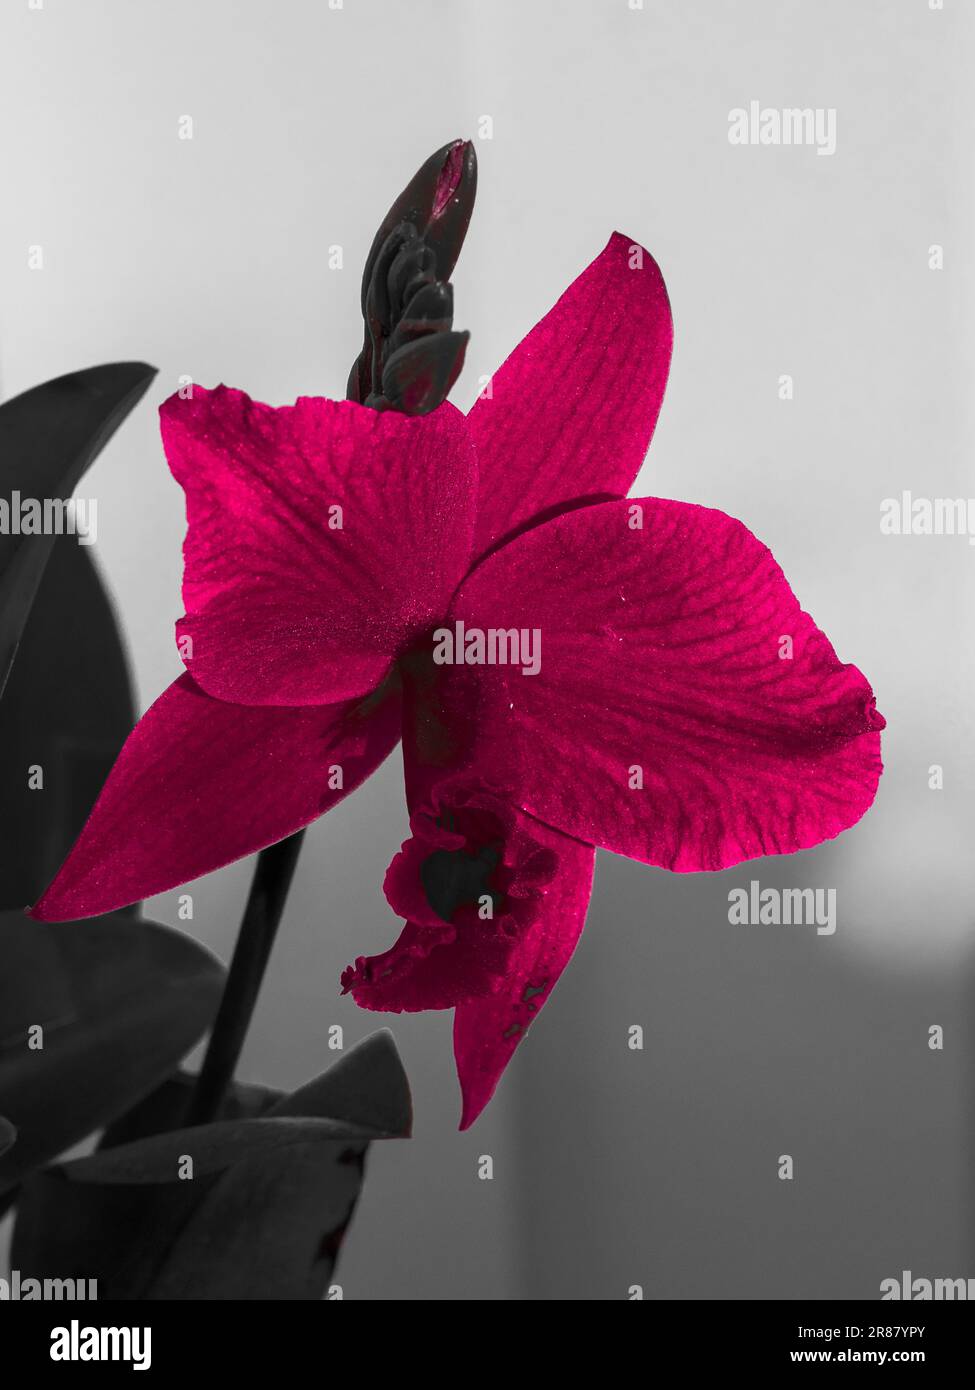 Partial colour photo of red bloom and buds of the Laeliocattleya orchid flower, Hsin Buu Lady, Australian coastal garden Stock Photo